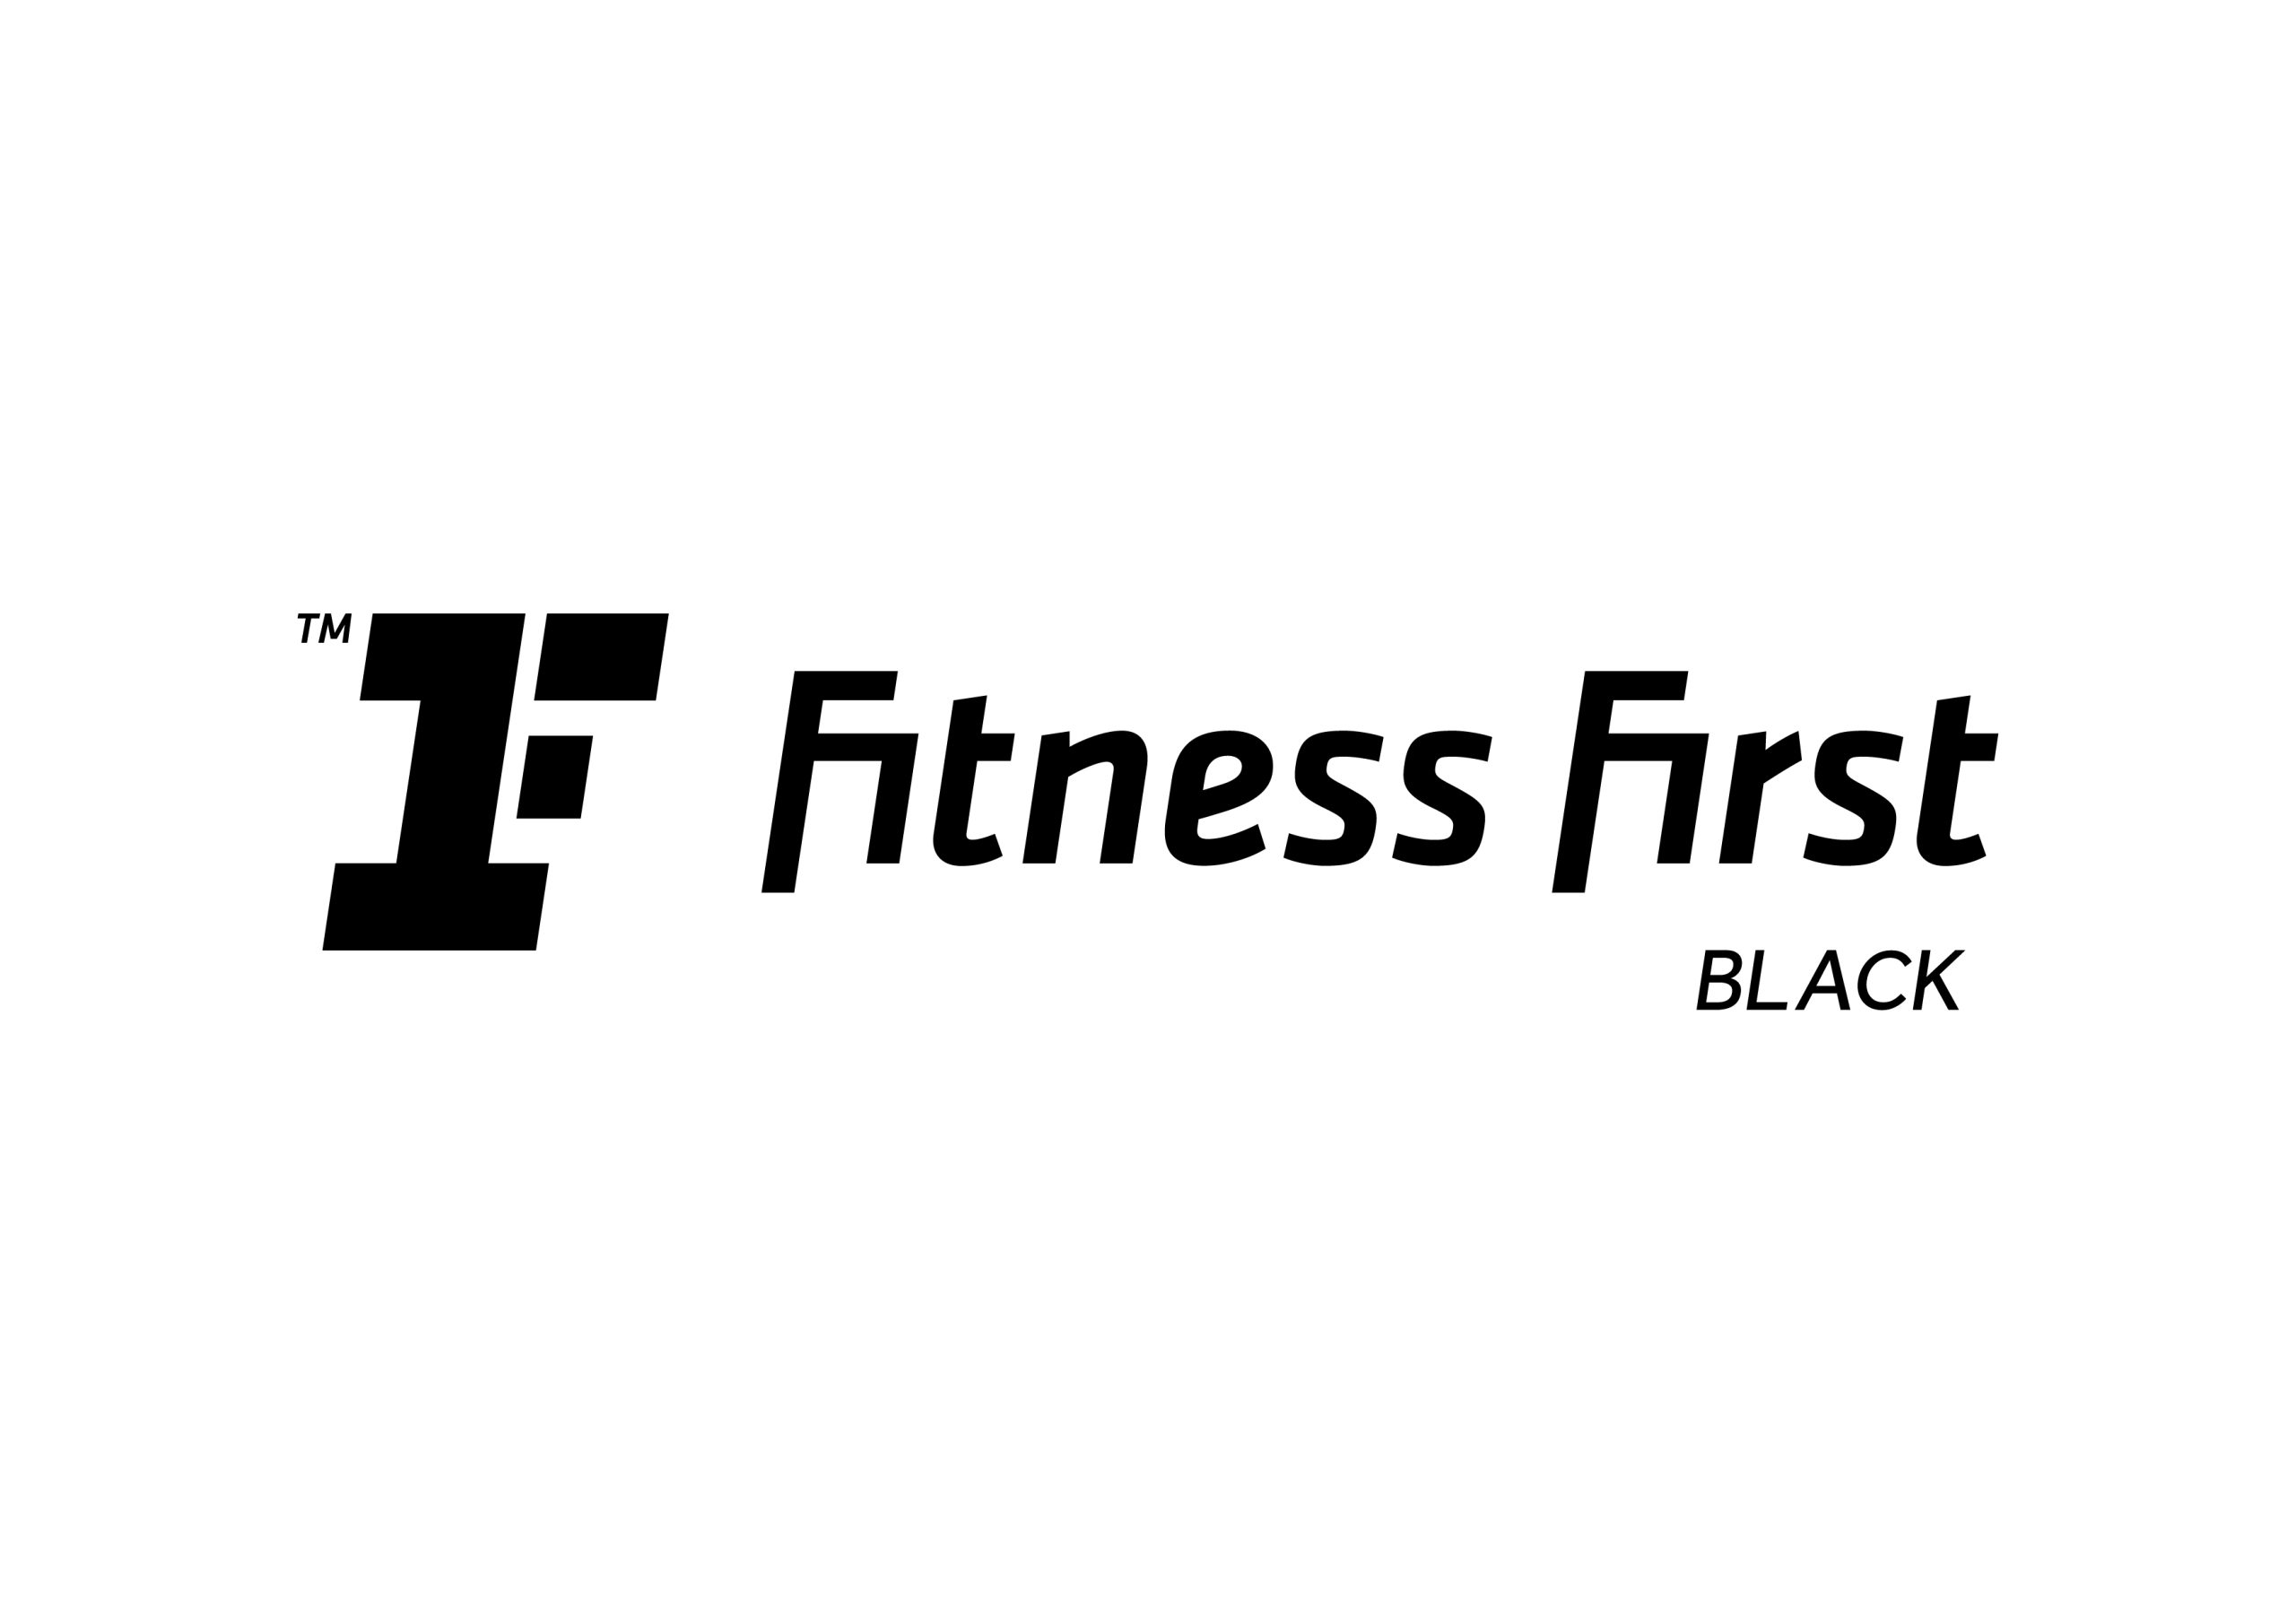 Fitness first